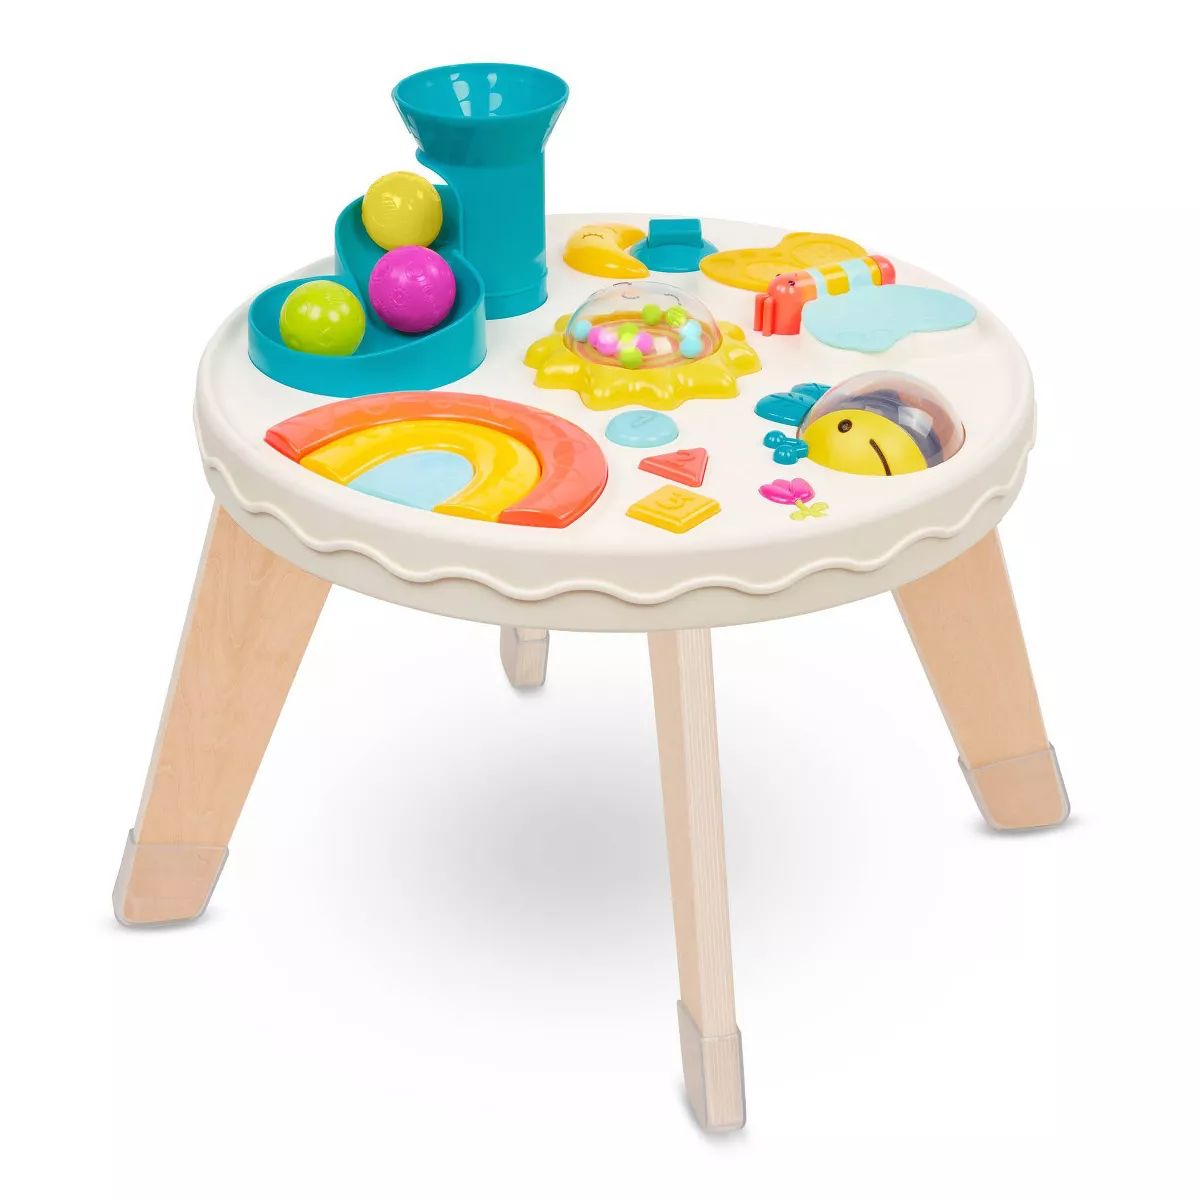 B. play - Baby Activity Table - Colorful & Sensory Station | Target